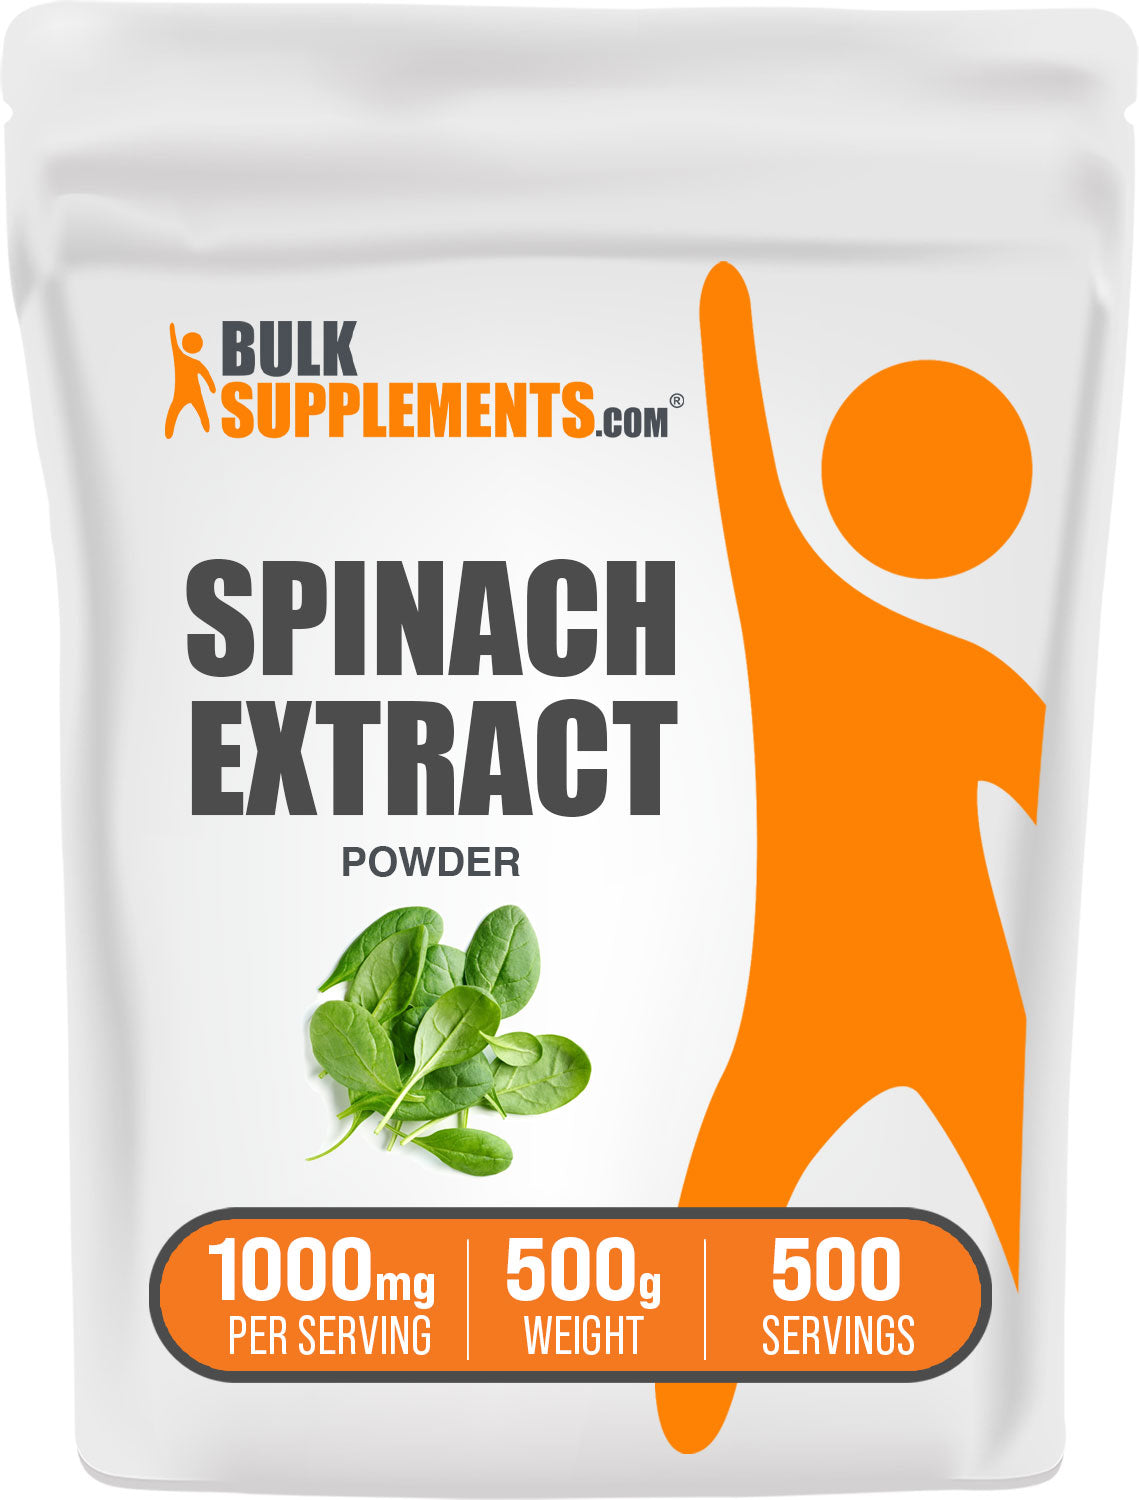 BulkSupplements Spinach Extract Powder 500g bag